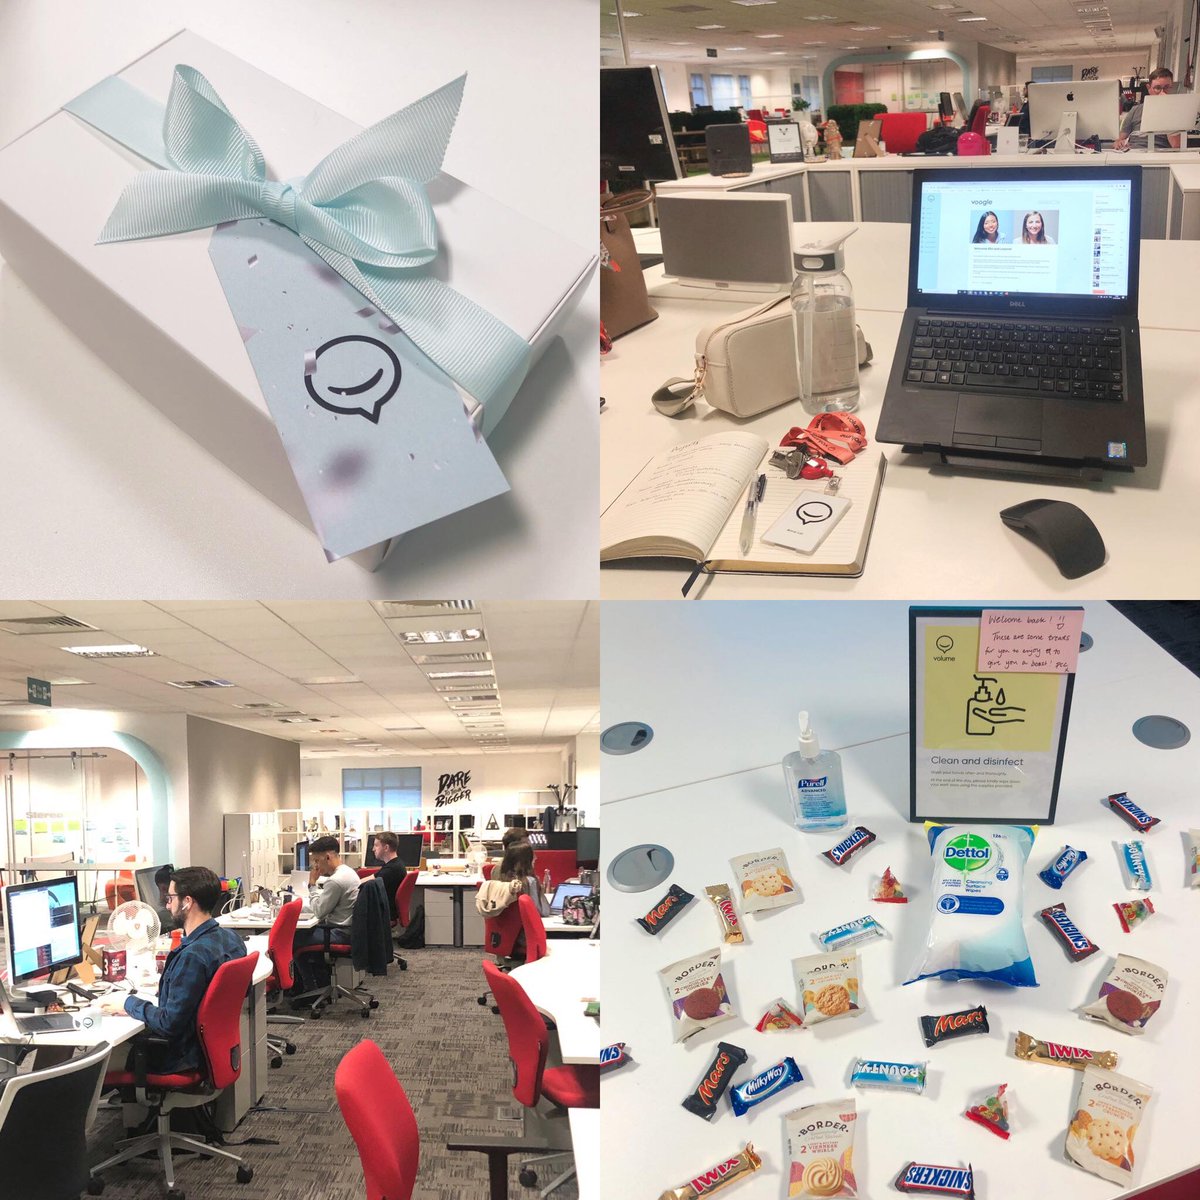 After 15 wks of lockdown/#WFH, our HQ has now become available for ‘team days’. Whilst we all still continue to remain remote, these team days will allow our people a day of variety from their home-working environments & the opportunity to catch up and collaborate.